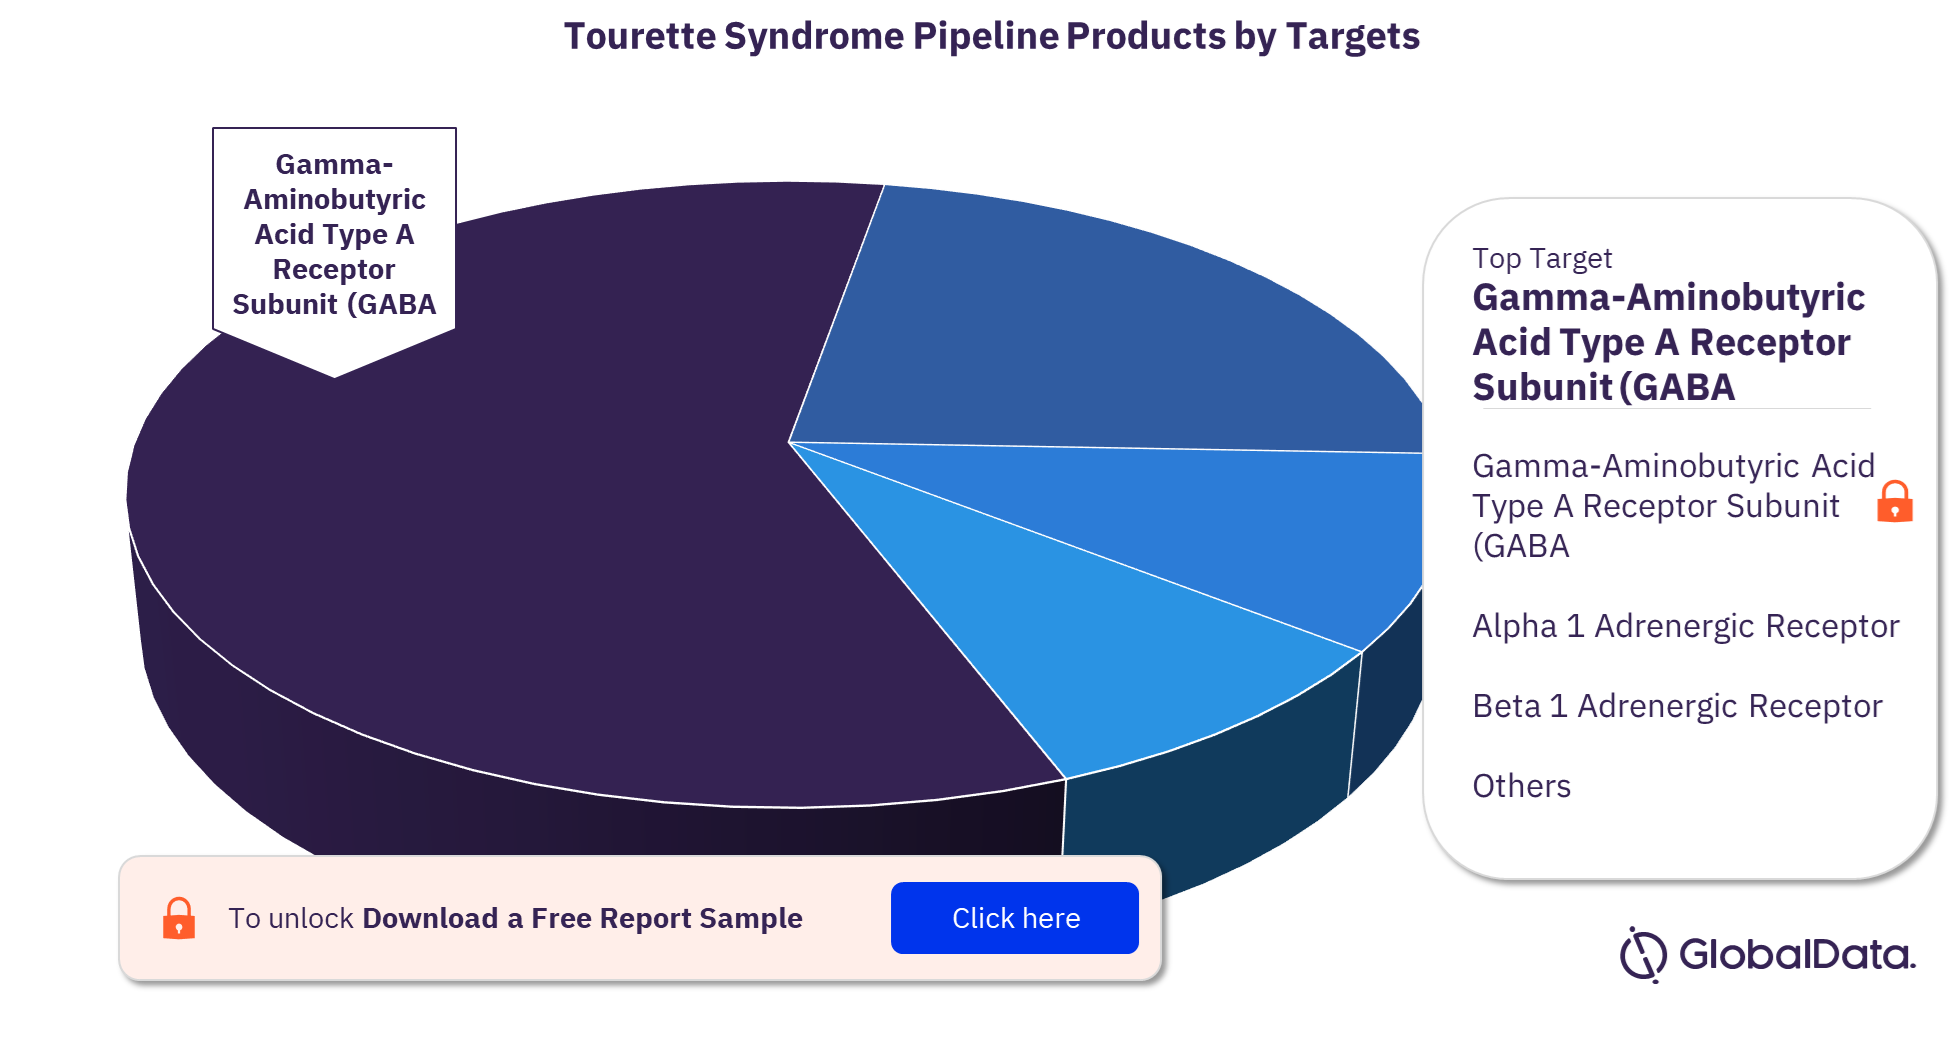 Tourette syndrome pipeline drugs market, by targets